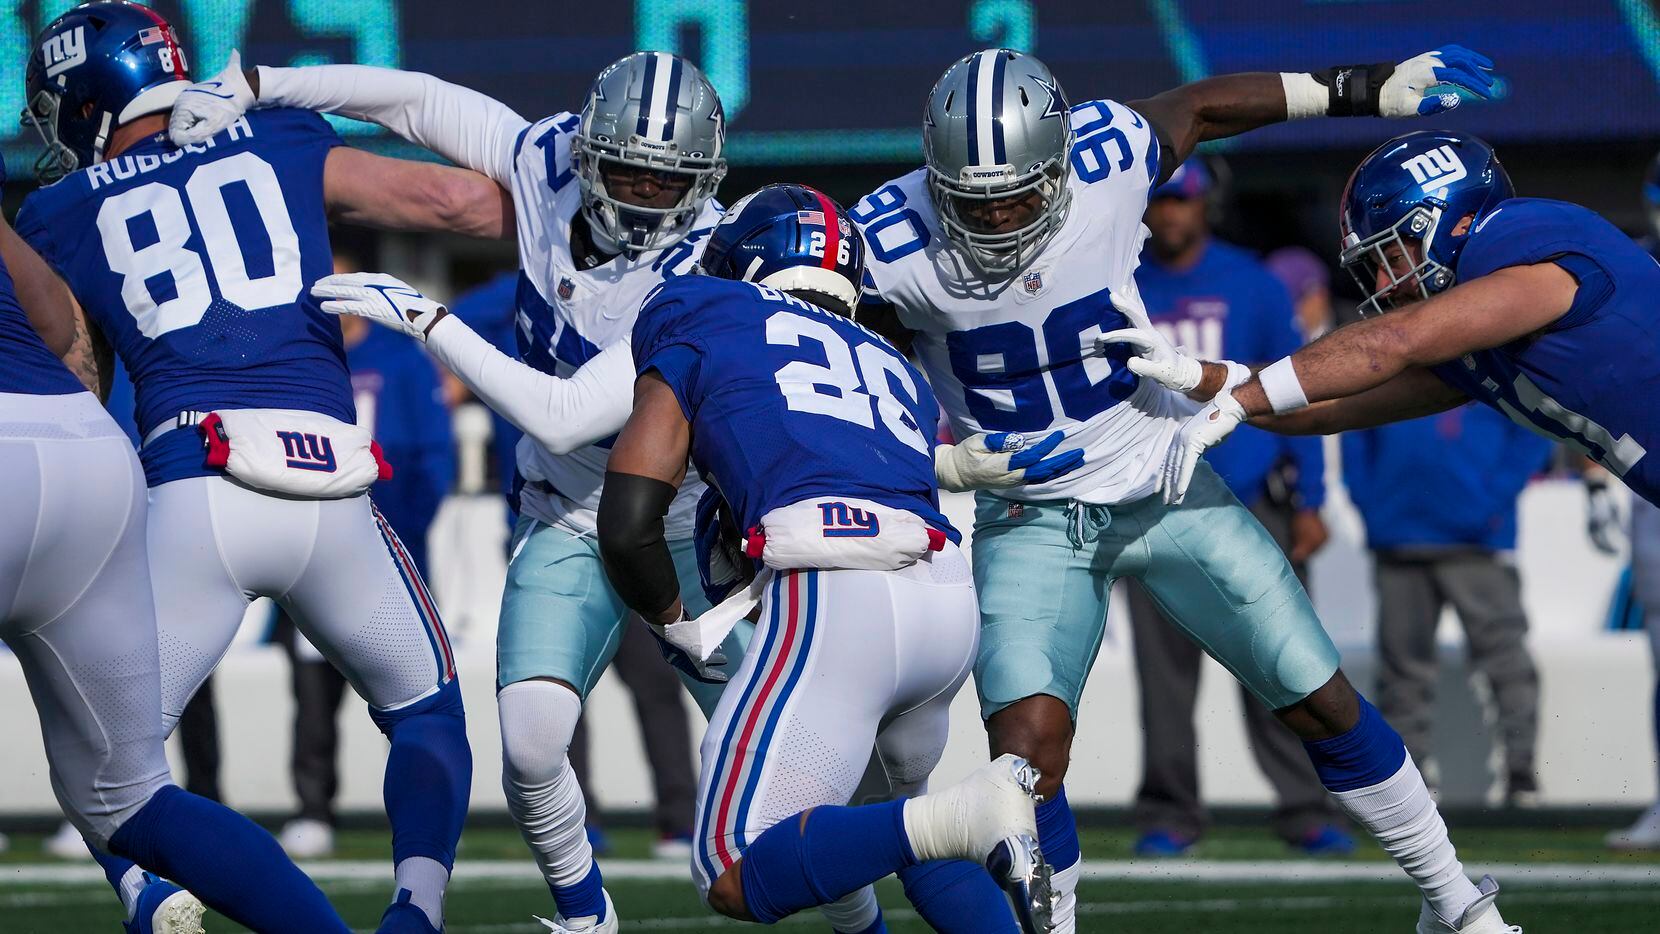 Dallas Cowboys defensive end Demarcus Lawrence (90) and safety Jayron Kearse (27) move in for a tackle on New York Giants running back Saquon Barkley (26) during the first half of an NFL football game on Sunday, Dec. 19, 2021, in East Rutherford, N.J.